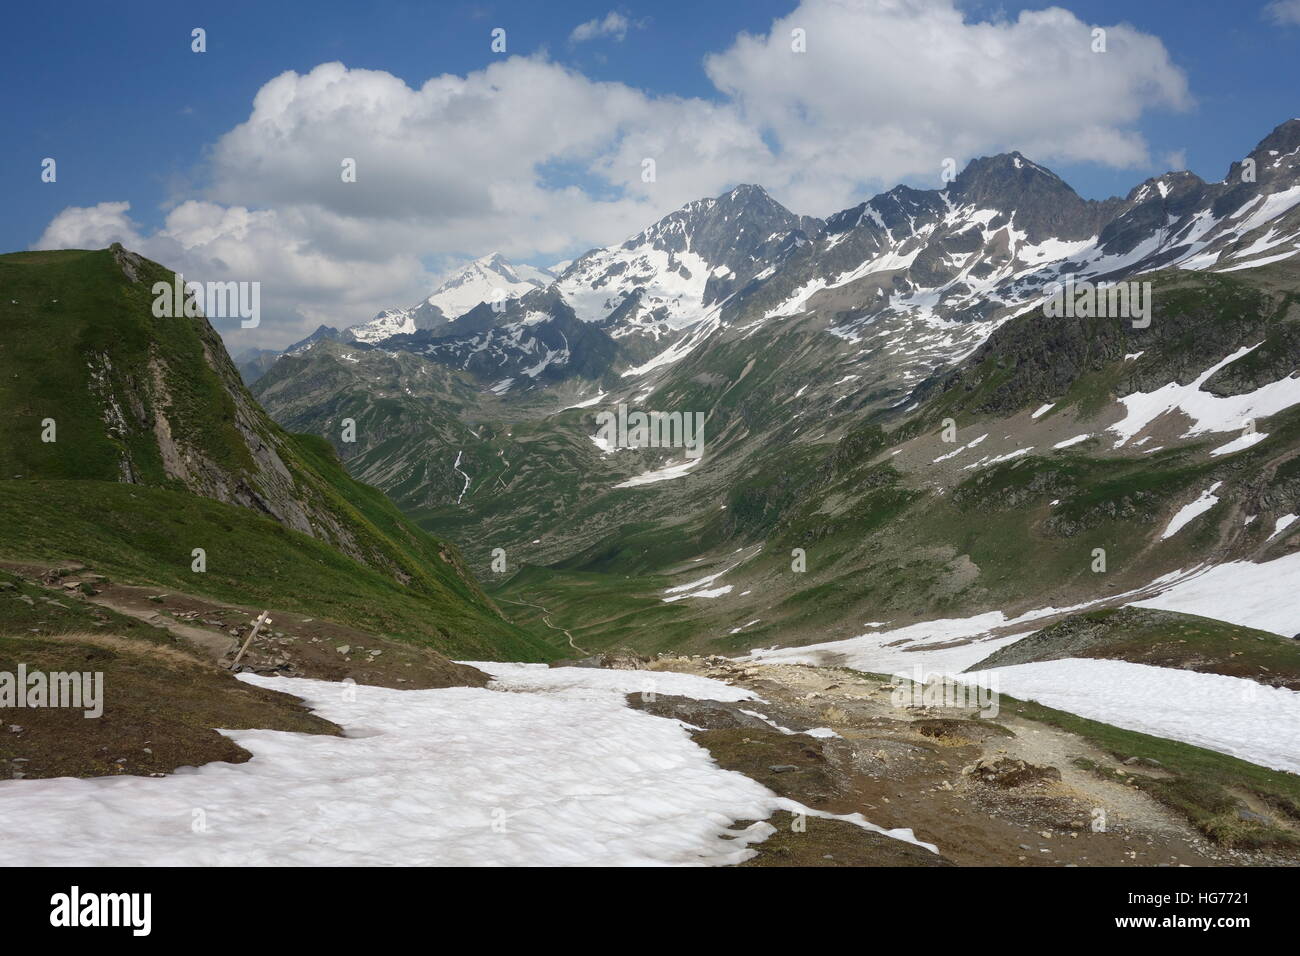 View from the Col du Bonhomme, near Les Contamines-Montjoie, in the French Alps. Stock Photo